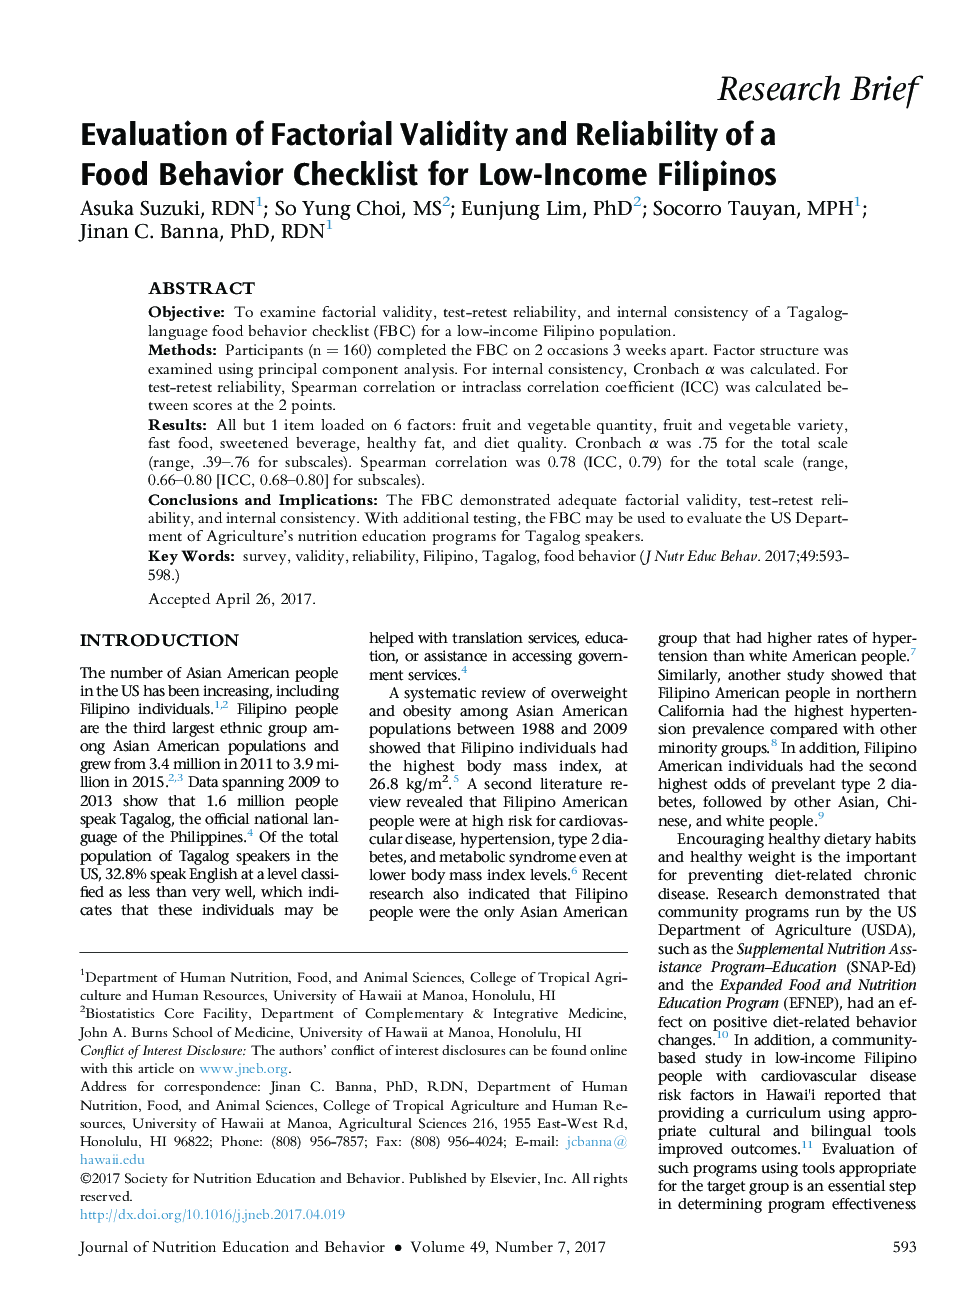 Evaluation of Factorial Validity and Reliability of a Food Behavior Checklist for Low-Income Filipinos